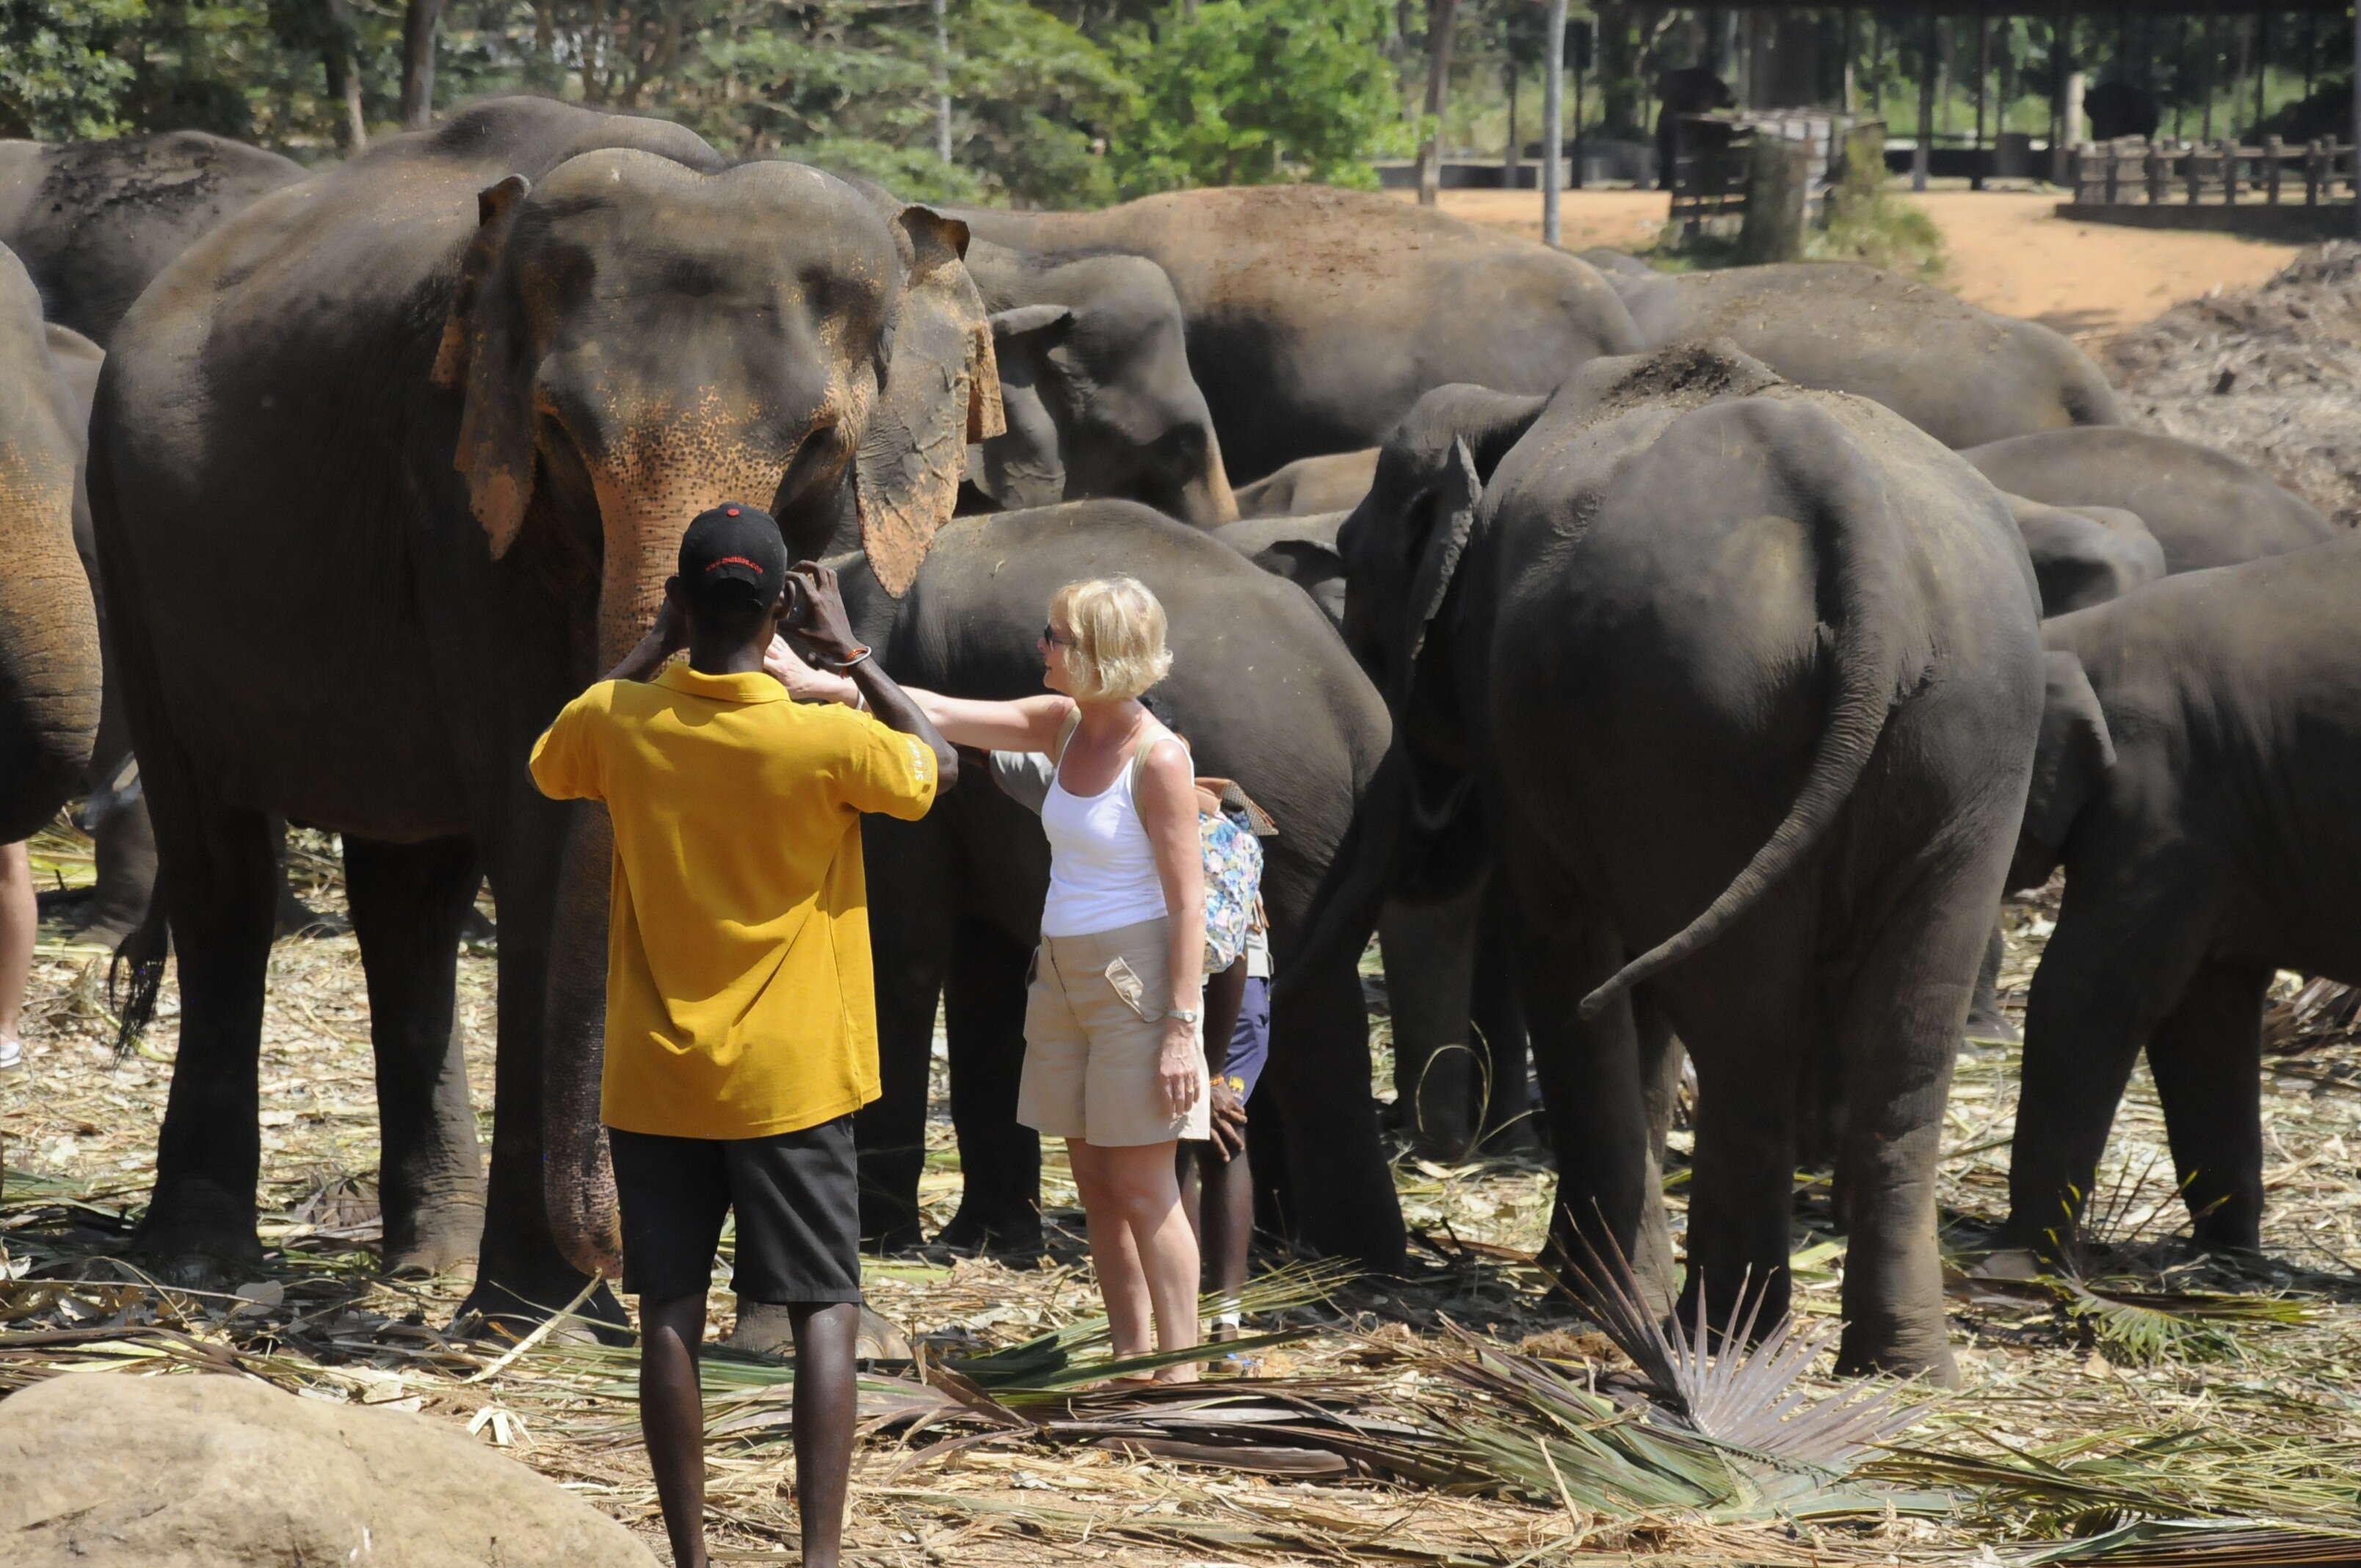 People posing for photos with elephants